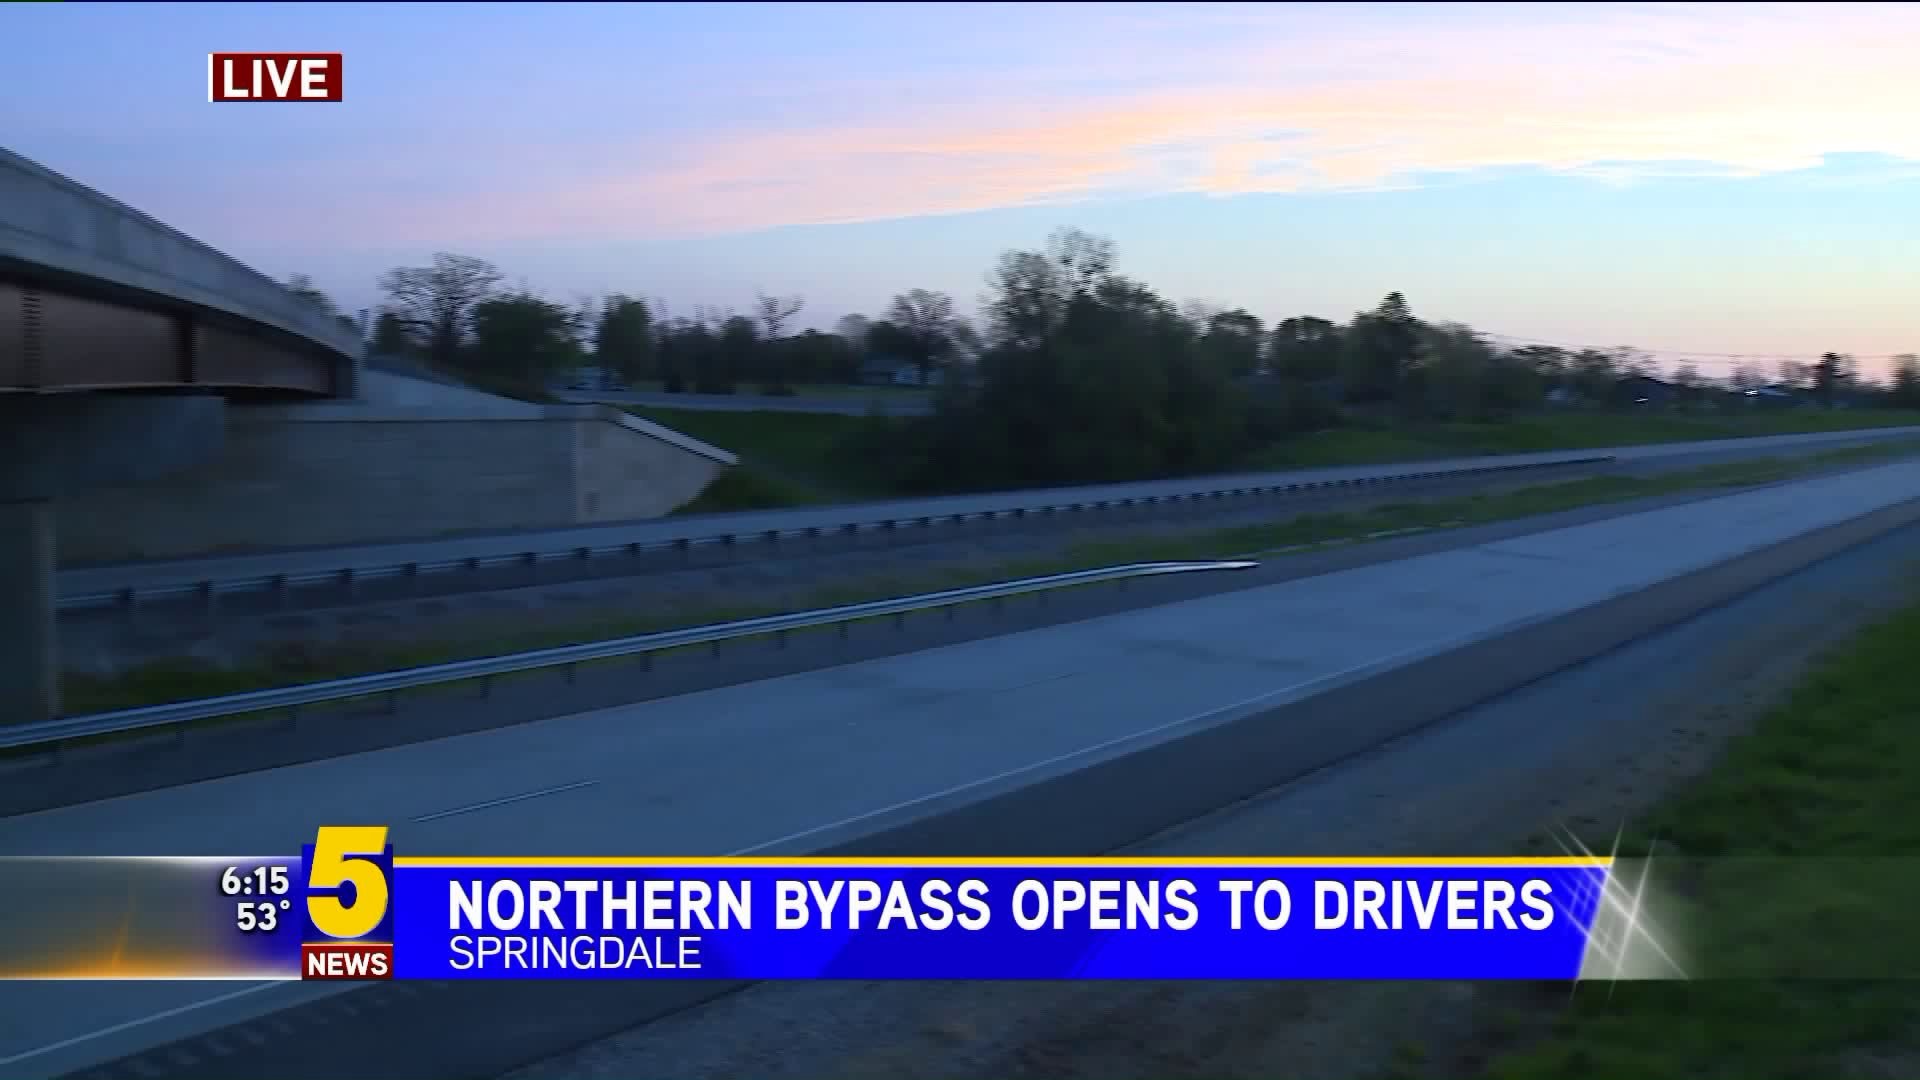 Springdale Northern Bypass Opens